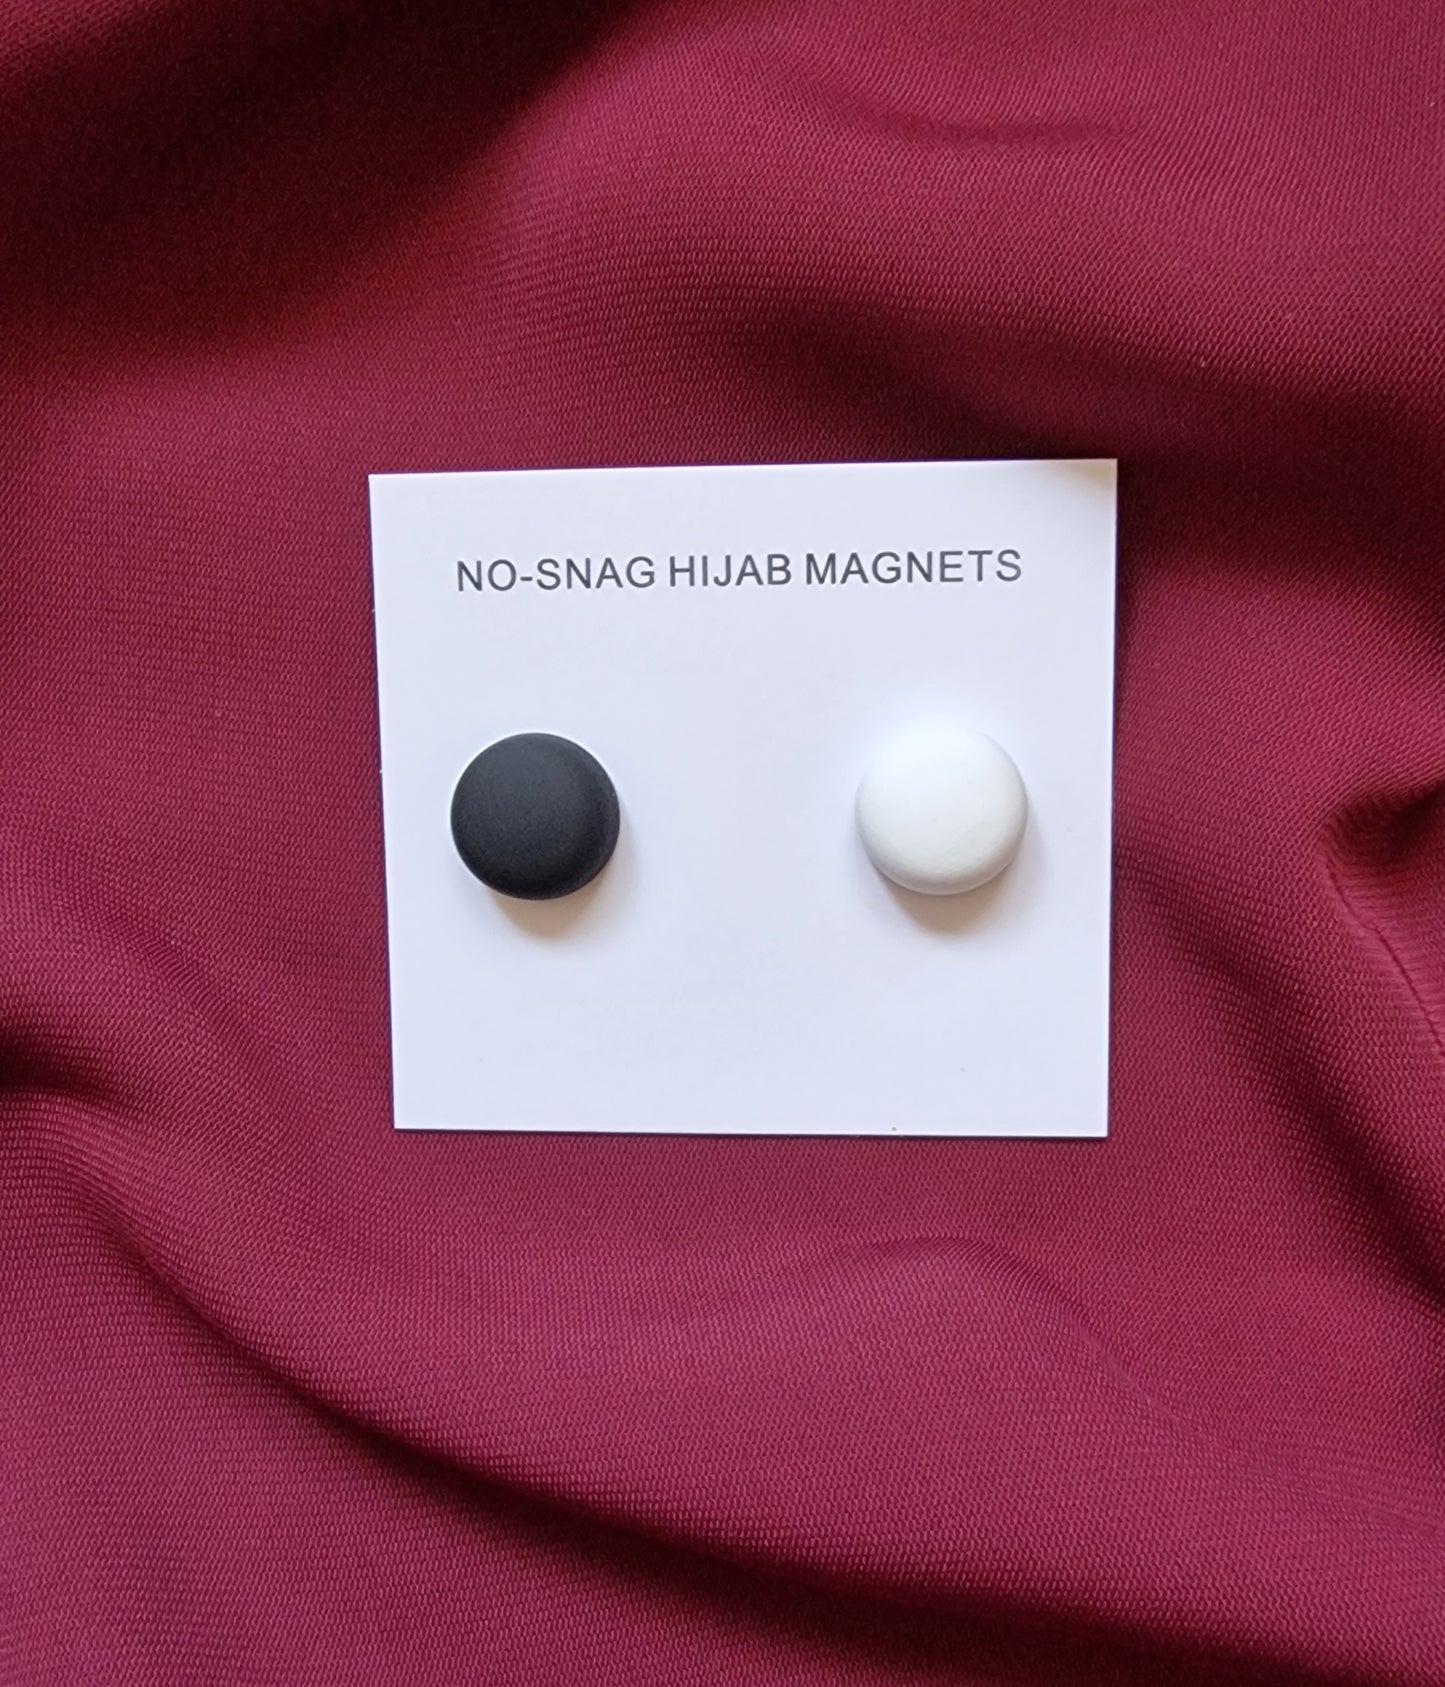 Magnetic pins